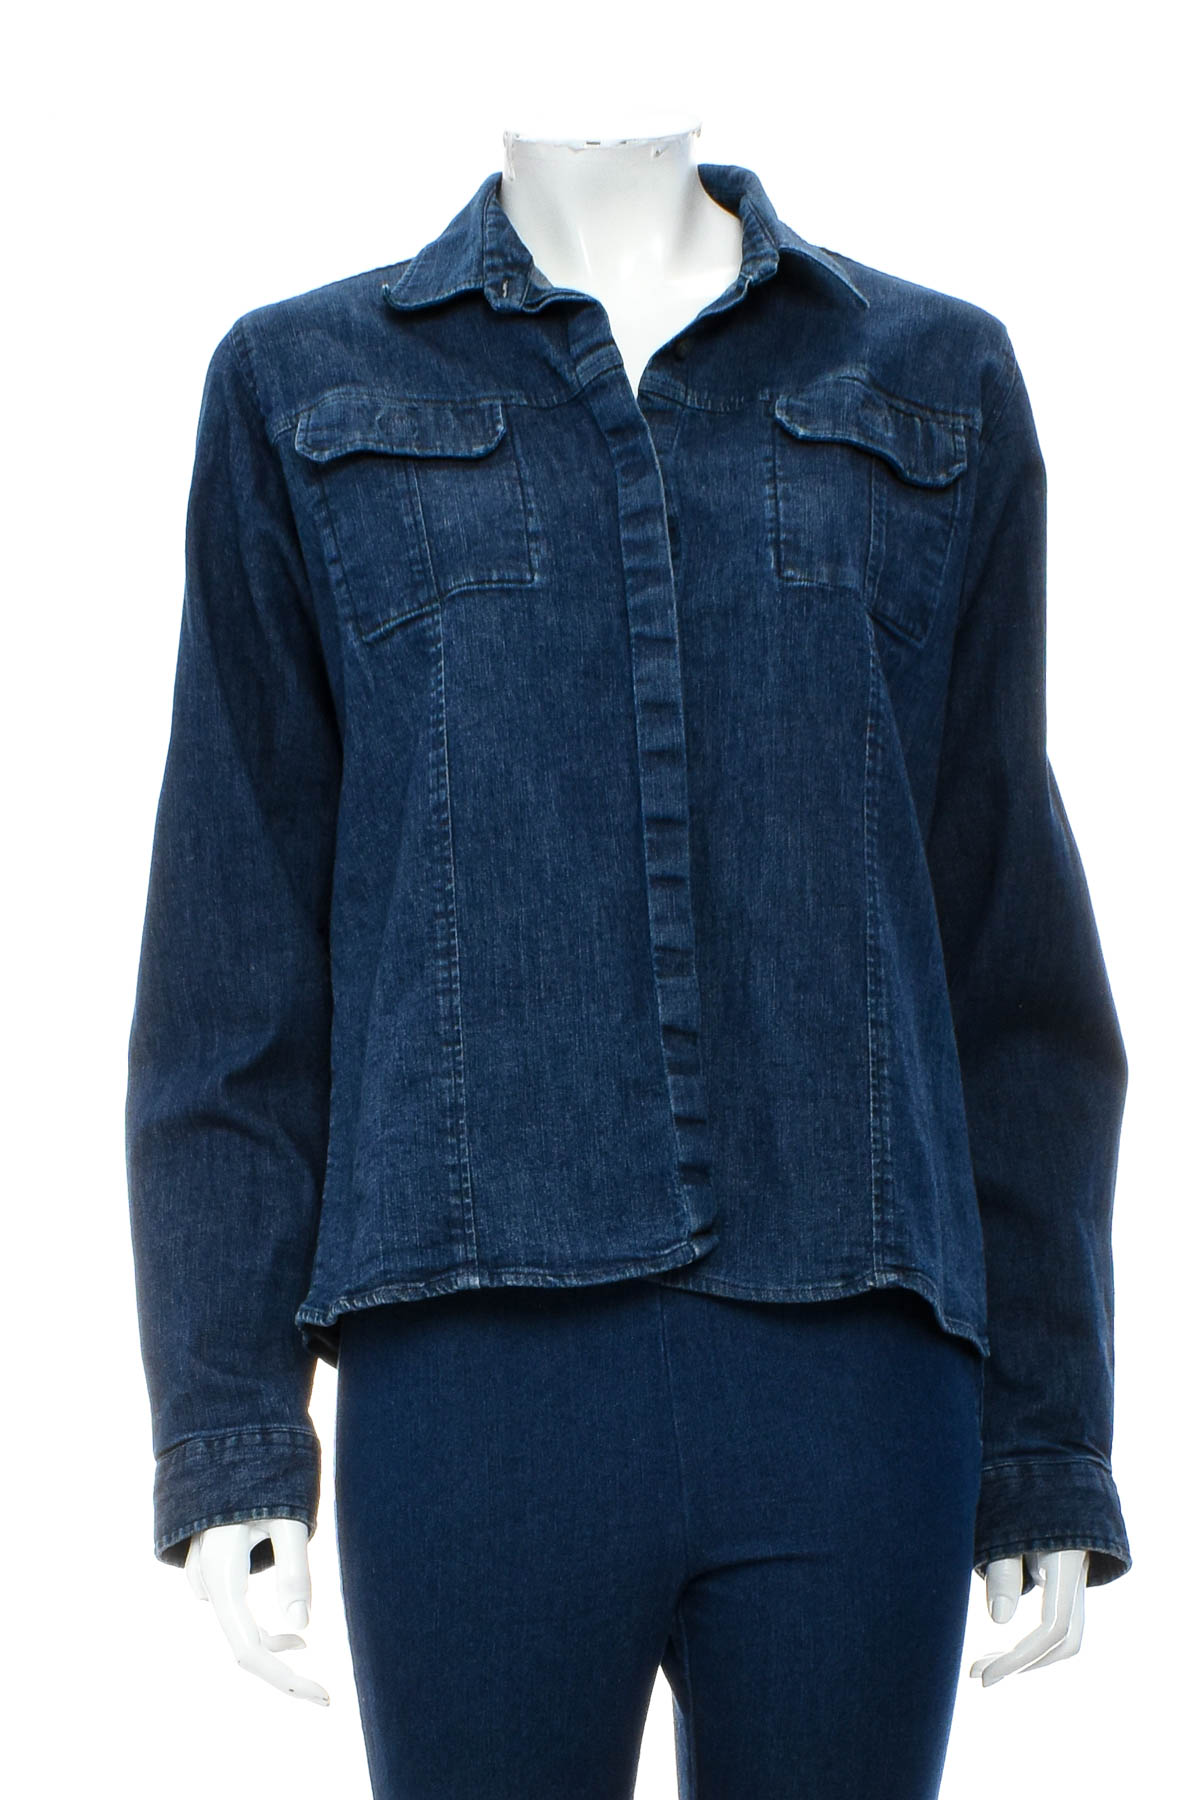 Woman's Denim Shirt - American Outfitters - 0